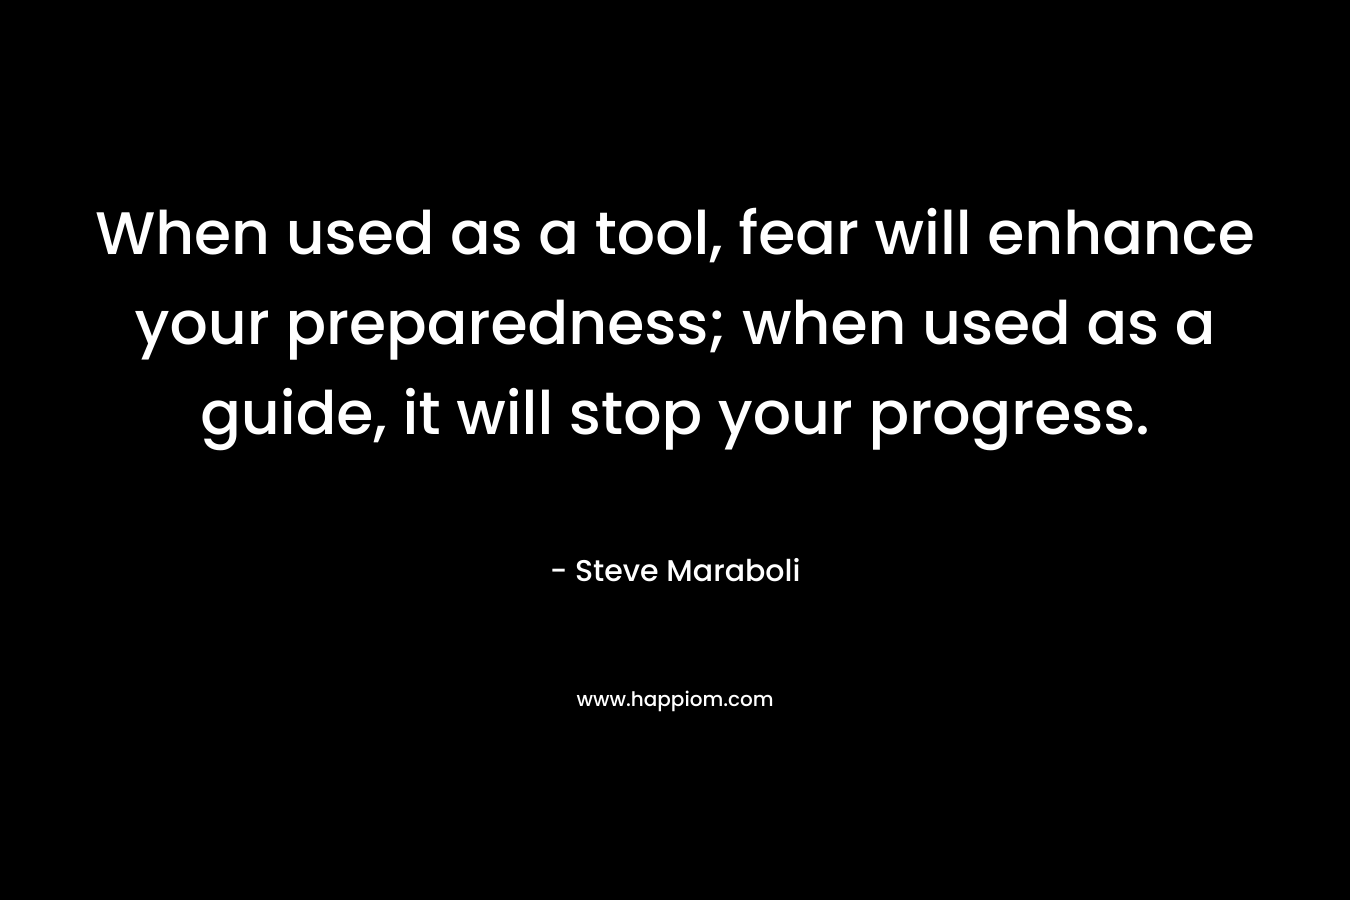 When used as a tool, fear will enhance your preparedness; when used as a guide, it will stop your progress.